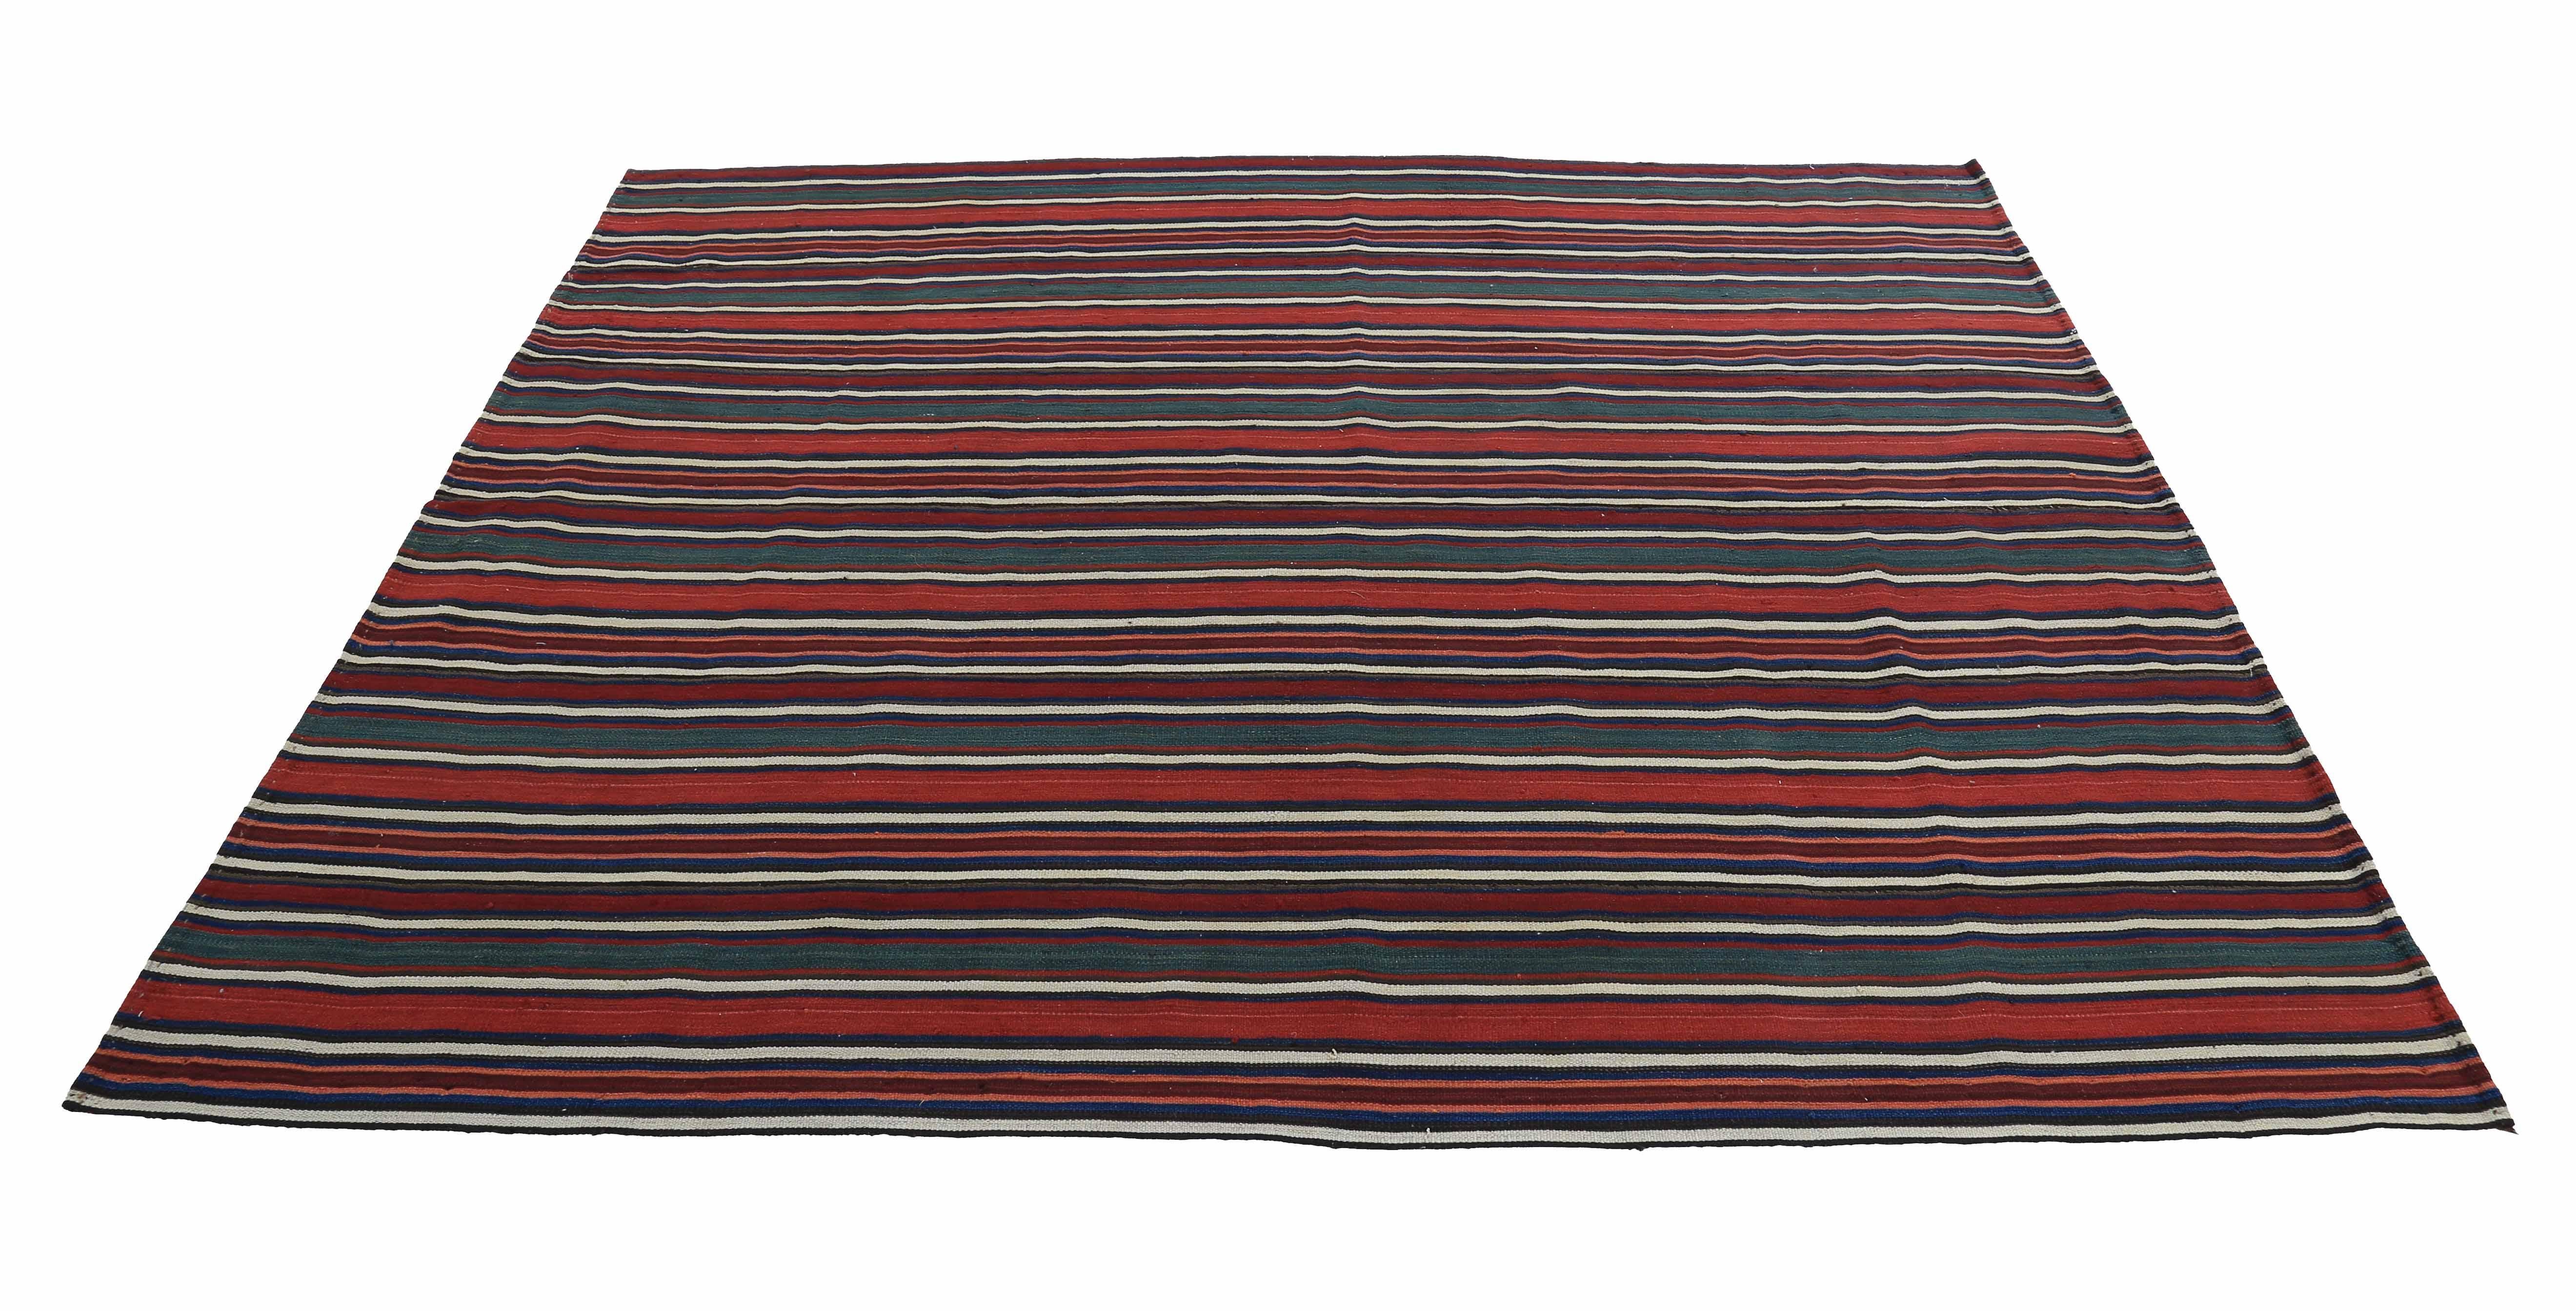 Modern Turkish rug handwoven from the finest sheep’s wool and colored with all-natural vegetable dyes that are safe for humans and pets. It’s a traditional Kilim flat-weave design featuring red, ivory and black stripes. It’s a stunning piece to get